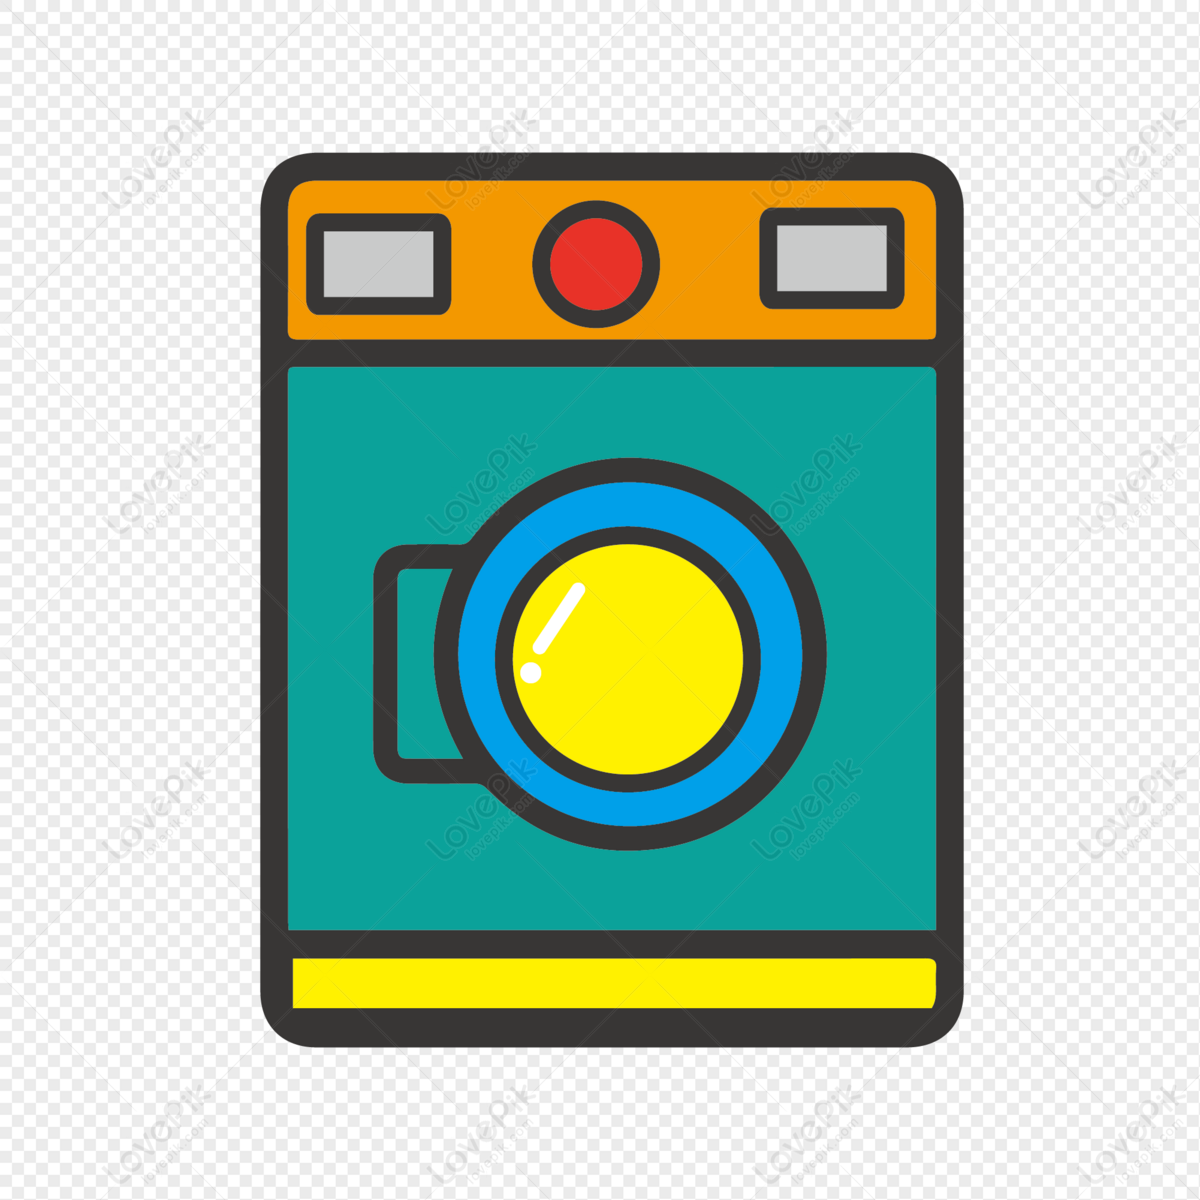 Washing Machine Material Washing Clothes Cartoon Slot Machine Png Image And Clipart Image For 6838